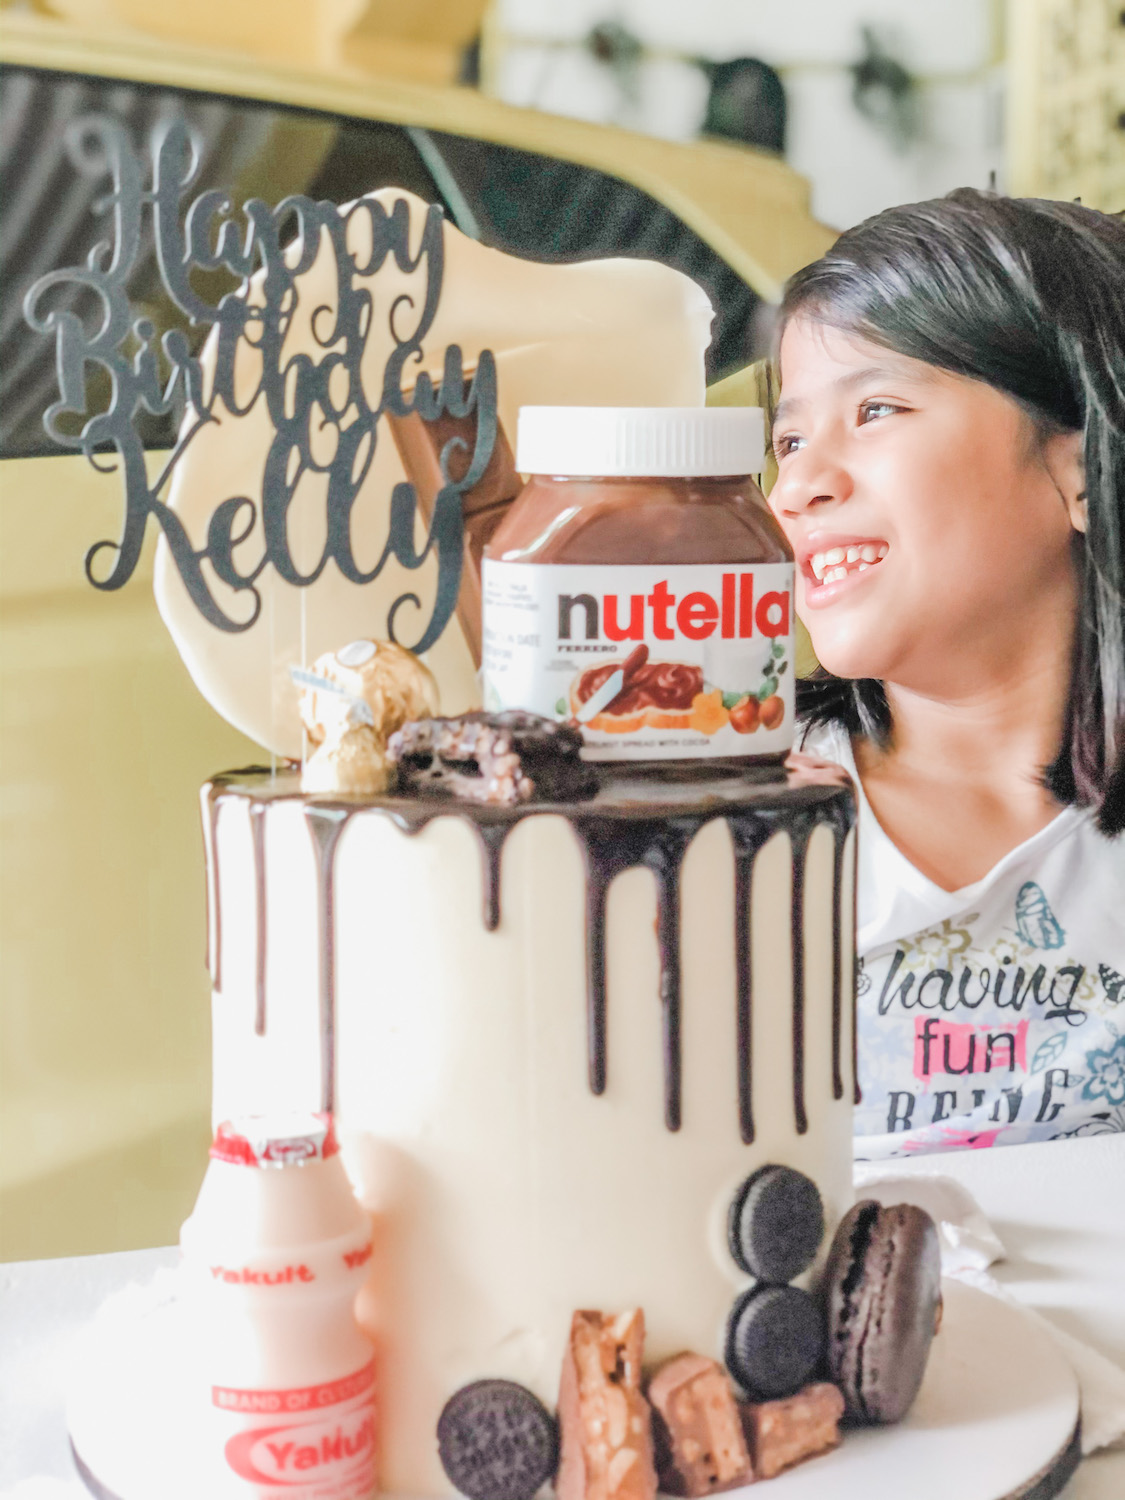 You are currently viewing Kelly’s 9th Birthday: Lasagna, Milk Tea, and Nutella Cake